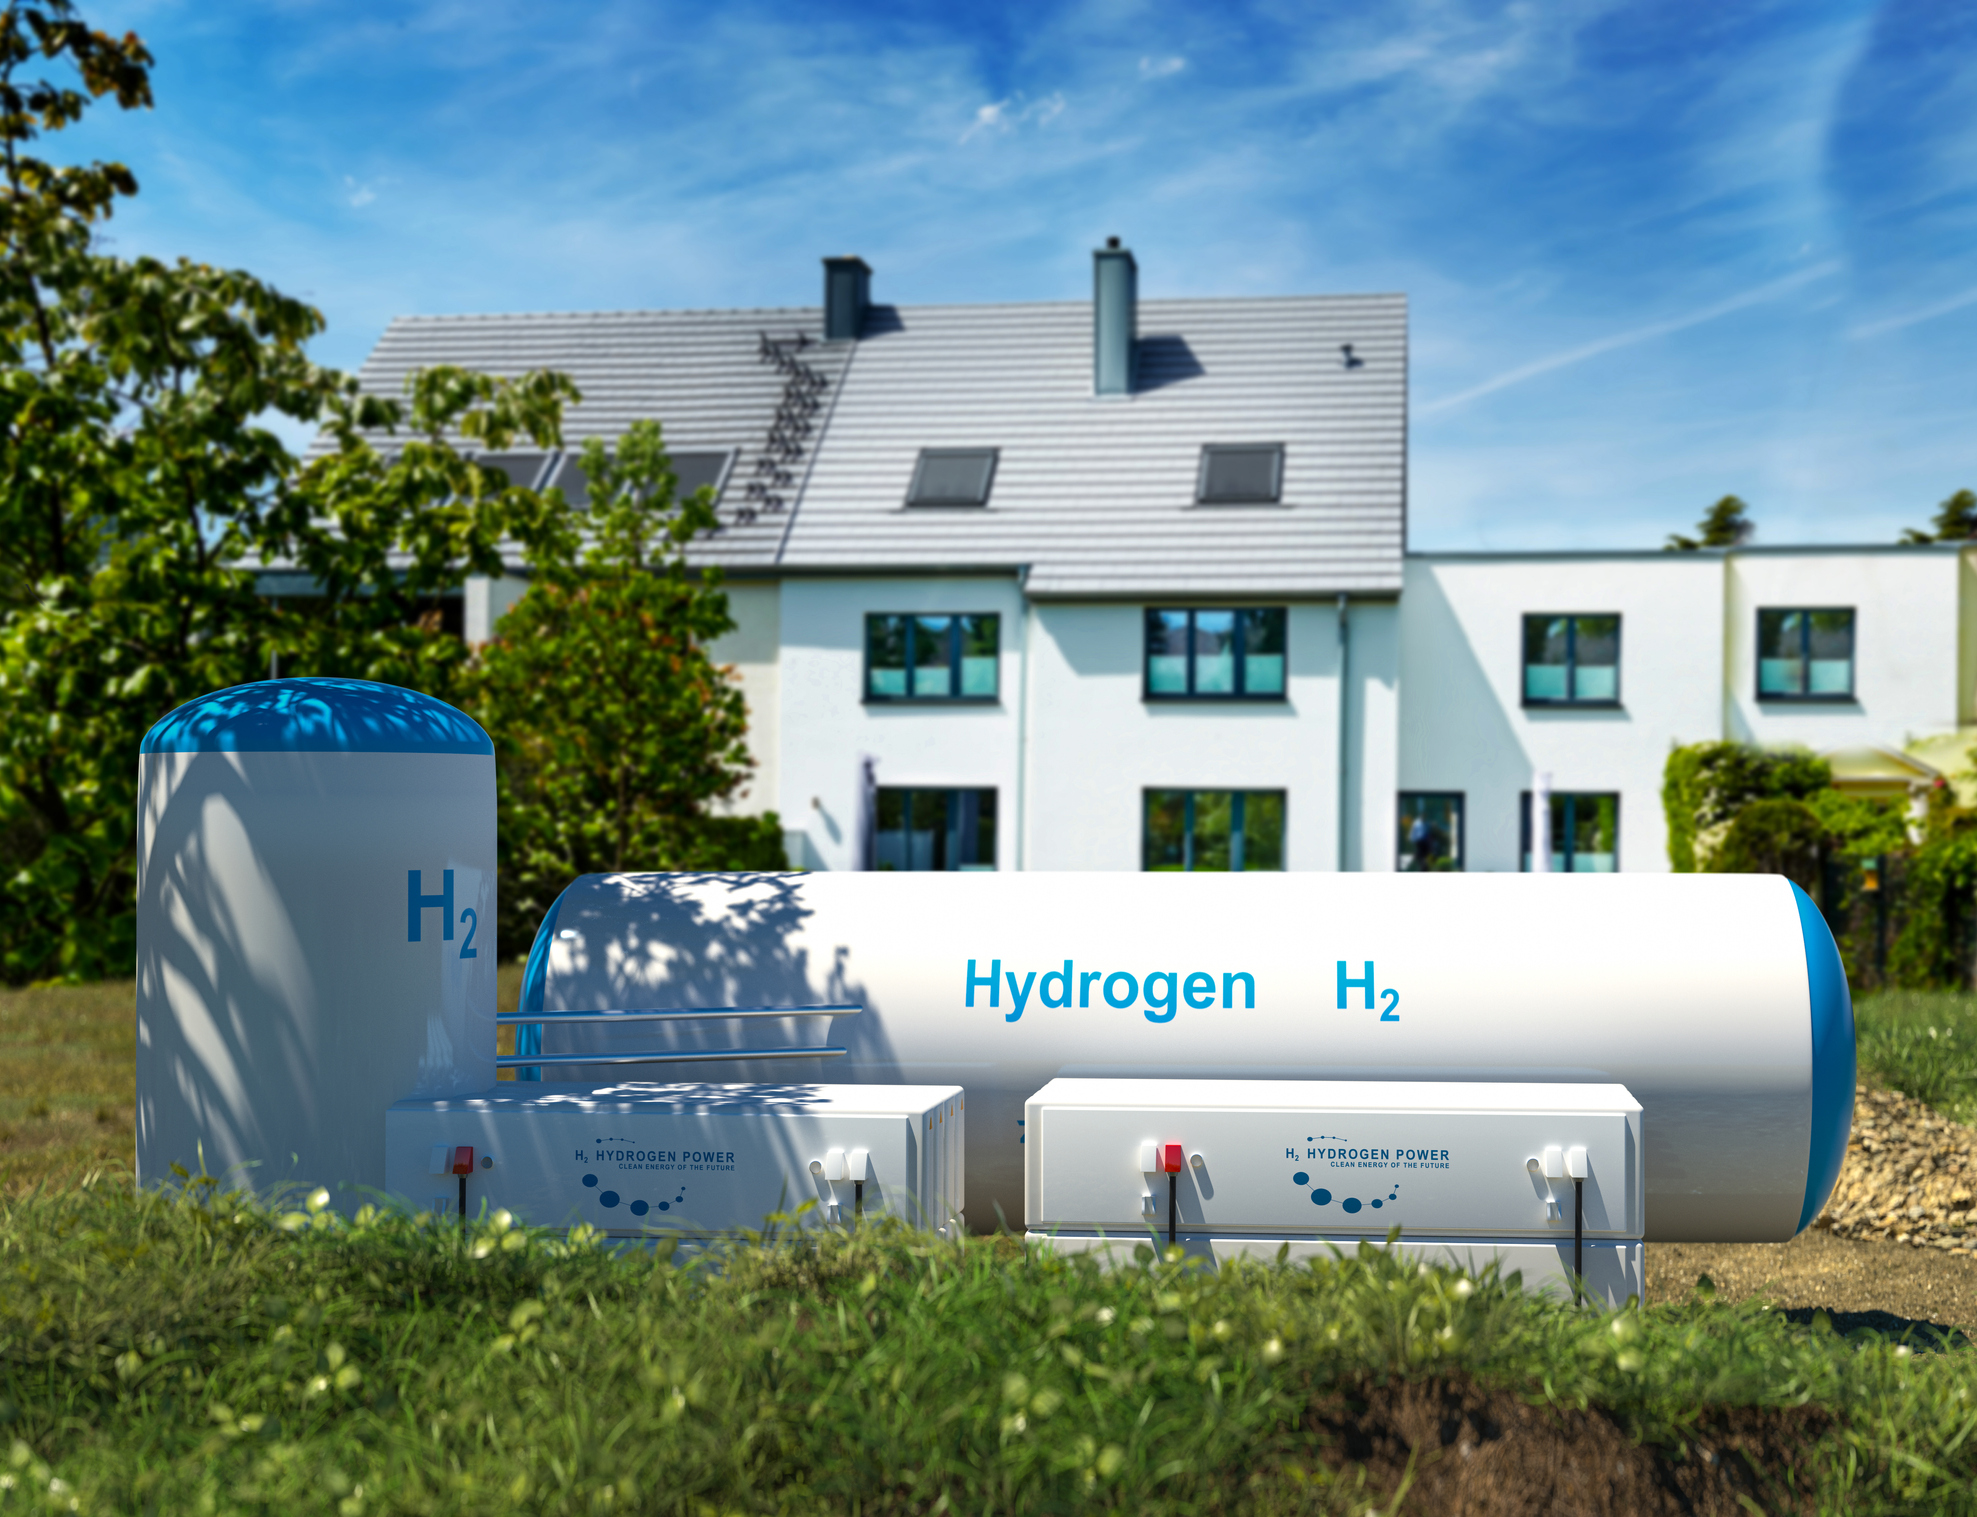 Hydrogen renewable energy production - hydrogen gas for clean electricity at private real estate home